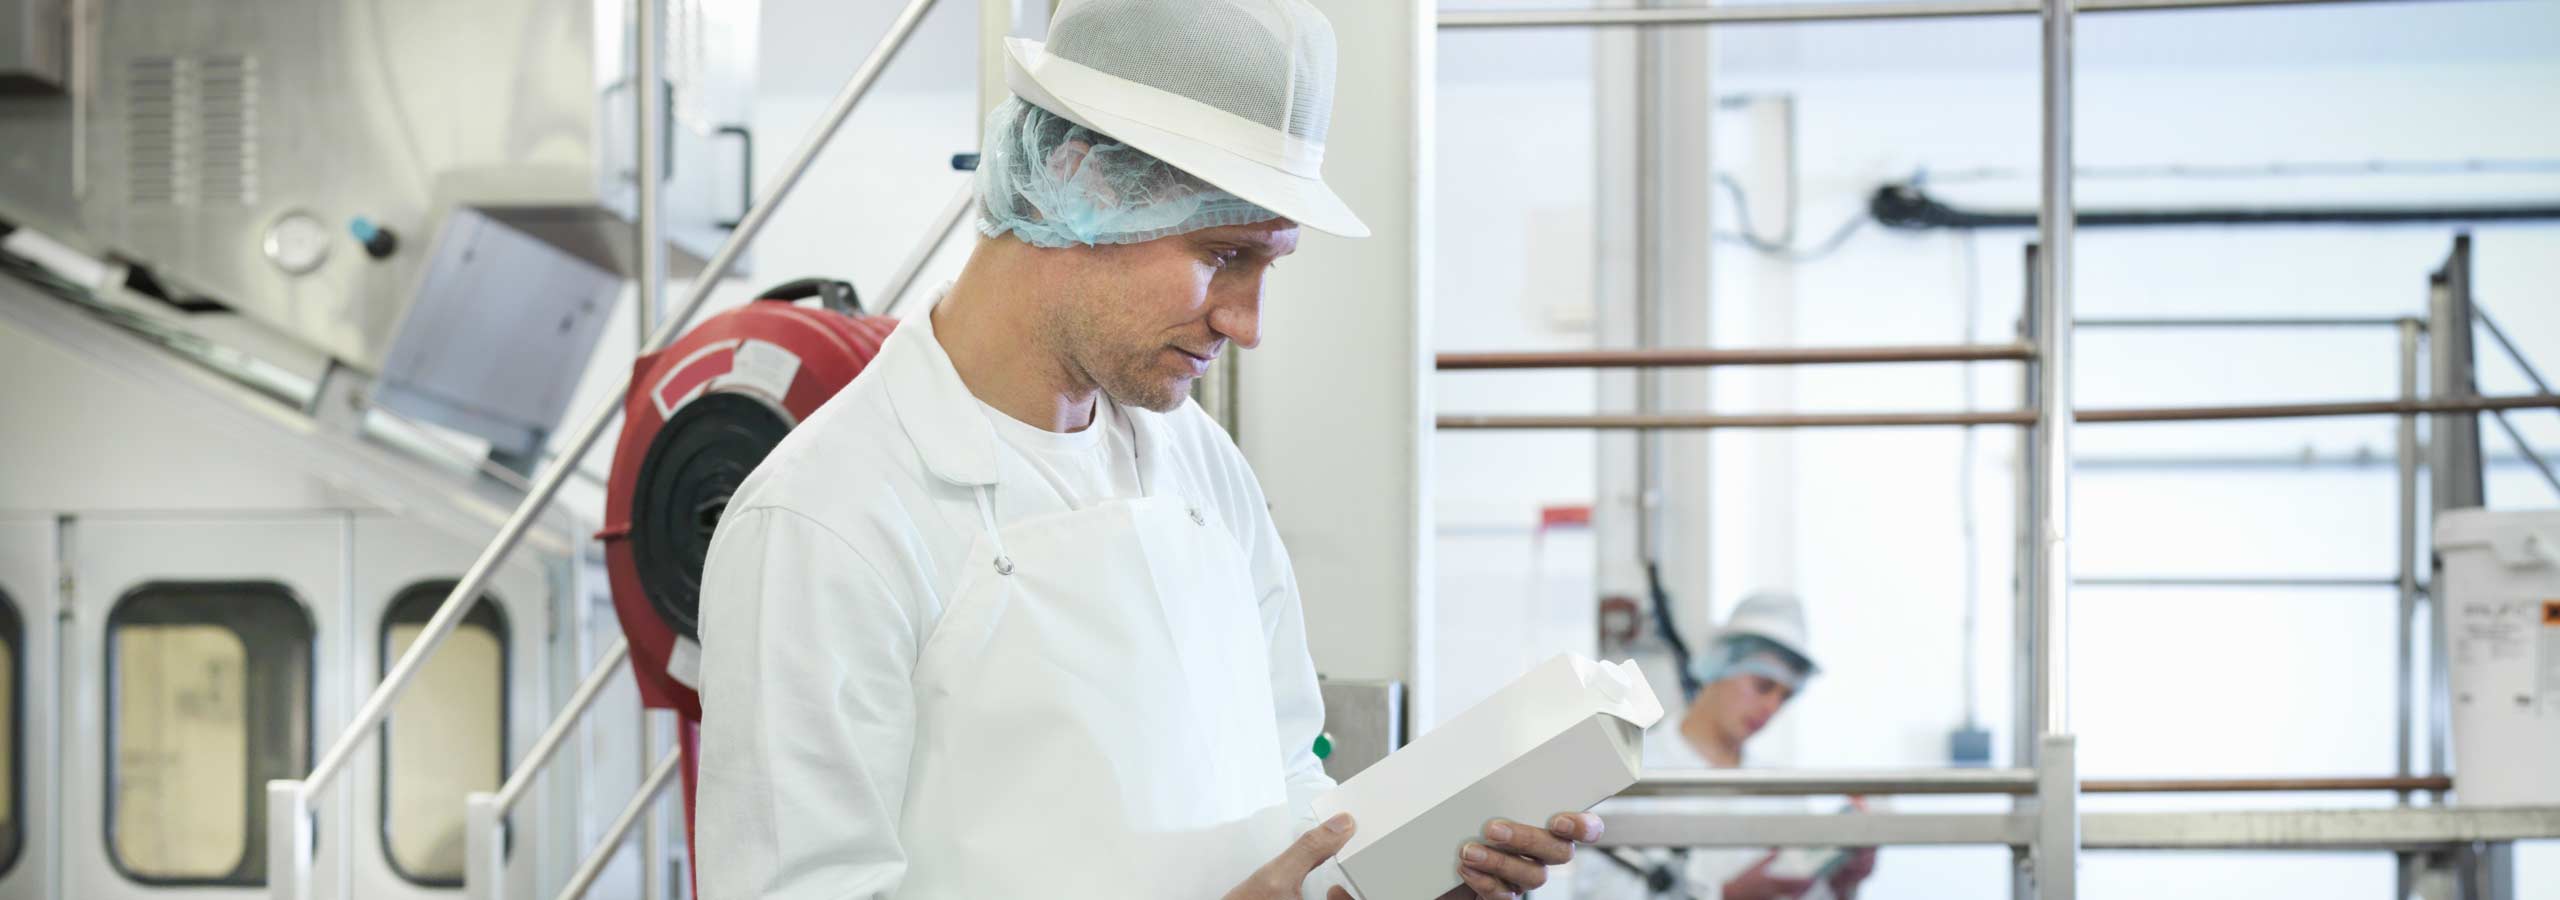 Worker inspecting goats milk in dairy, food and beverage, machine control.